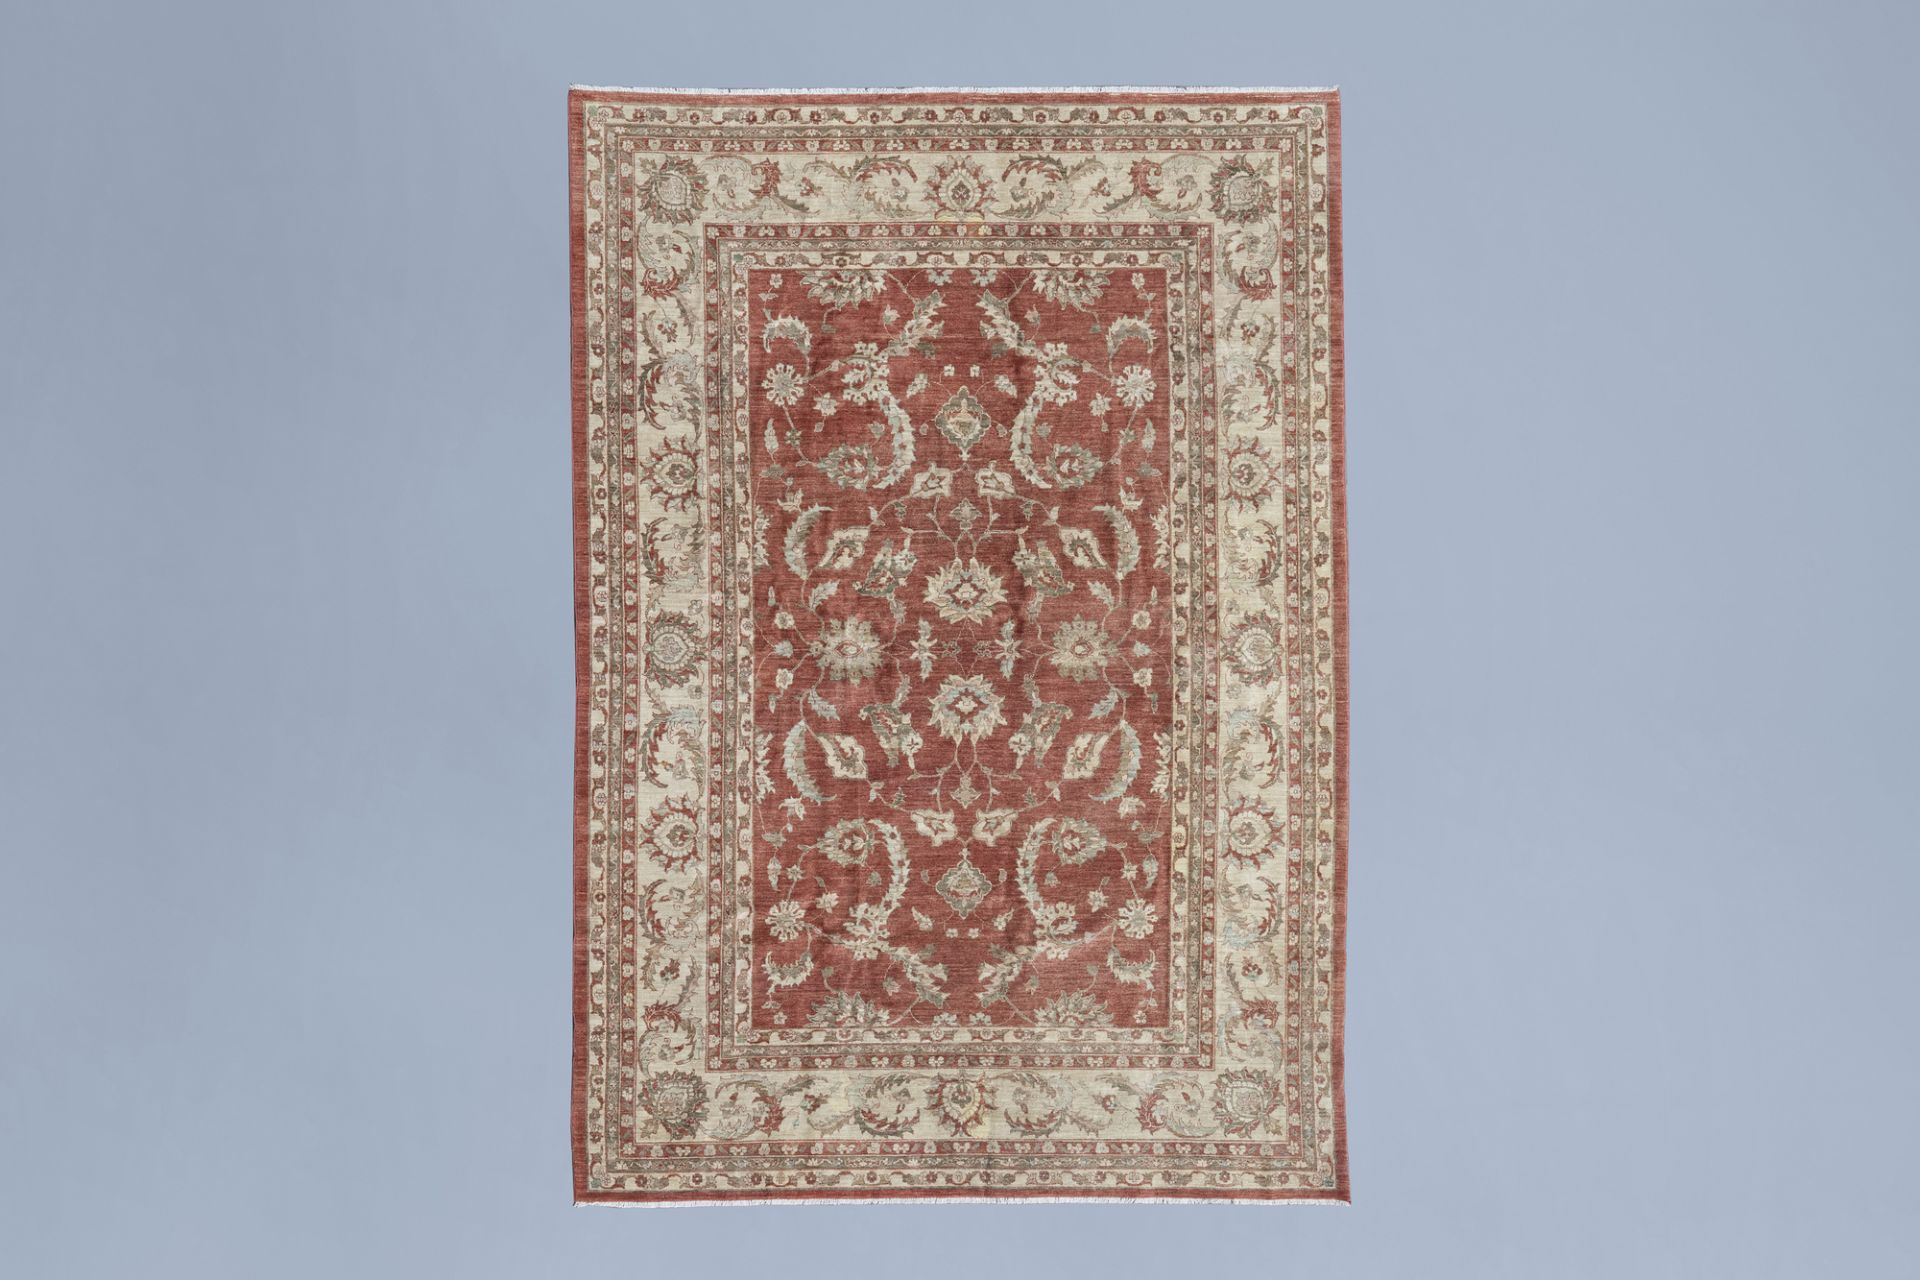 An Afghan rug with Ziegler design, wool on cotton, mid 20th C.